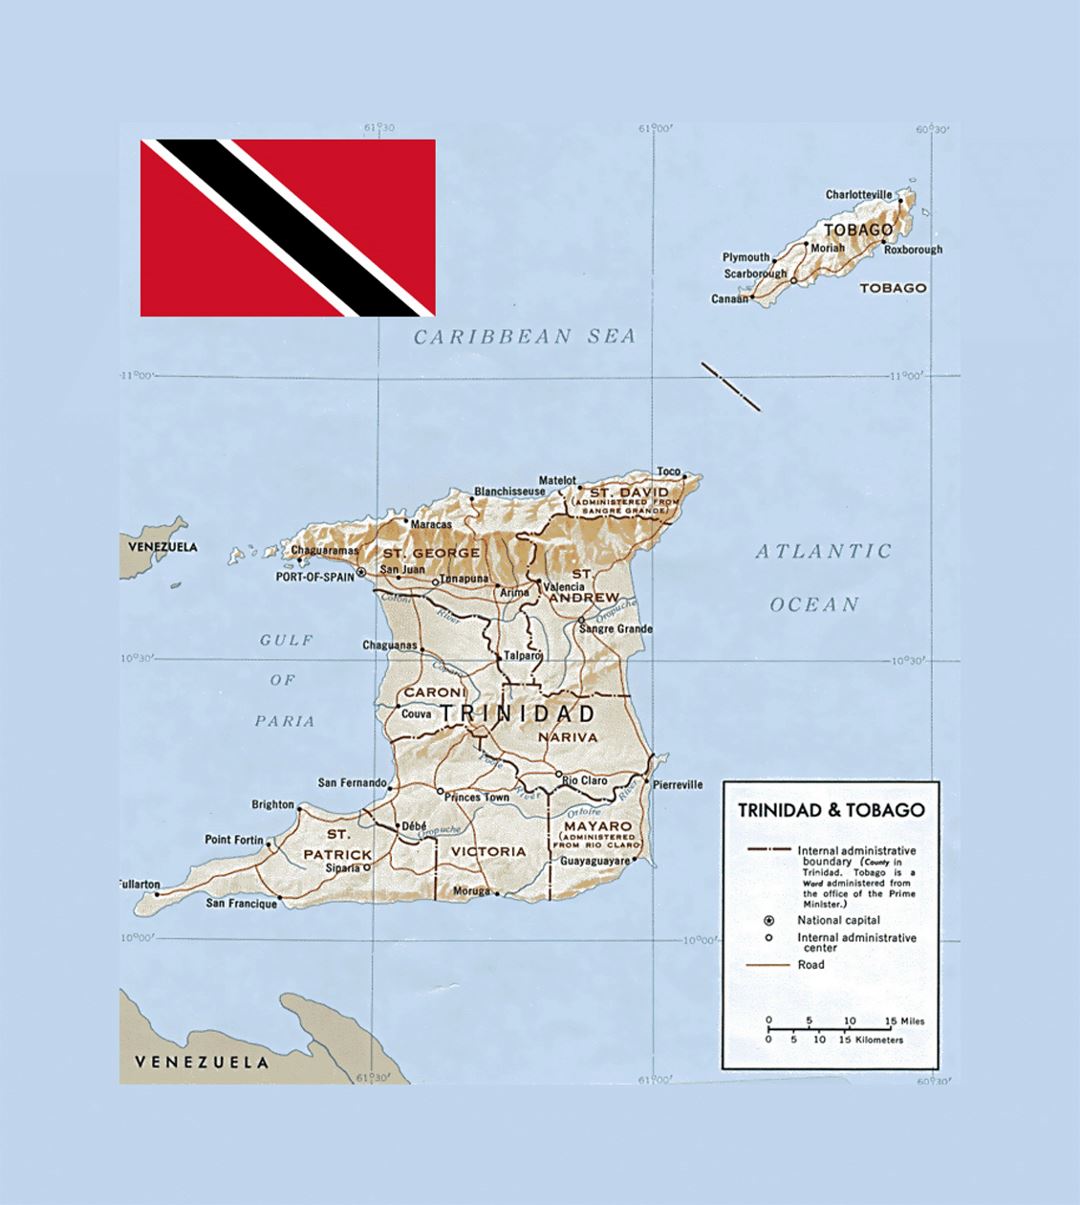 Political and administrative map of Trinidad and Tobago with relief and other marks